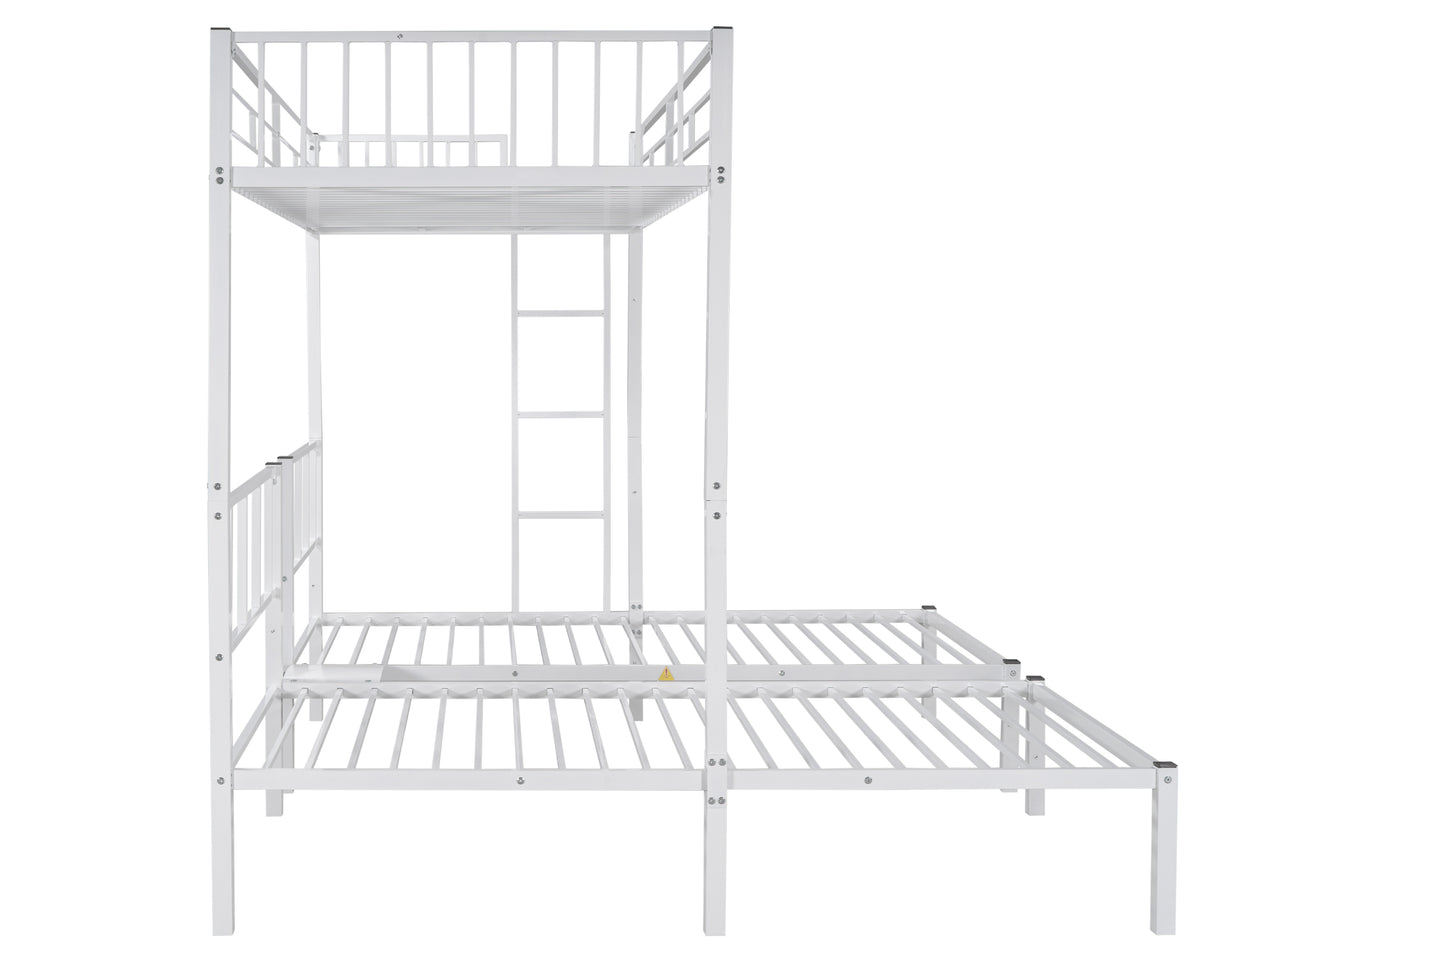 Twin Over Twin Over Twin Bunk Bed, BTMWAY Modern Metal Triple Bunk Beds, White Kids Triple Bunk Beds with Guardrails, Ladders, Convert into 3 Twin Beds Bedroom Furniture, No Box Spring Needed, R1204